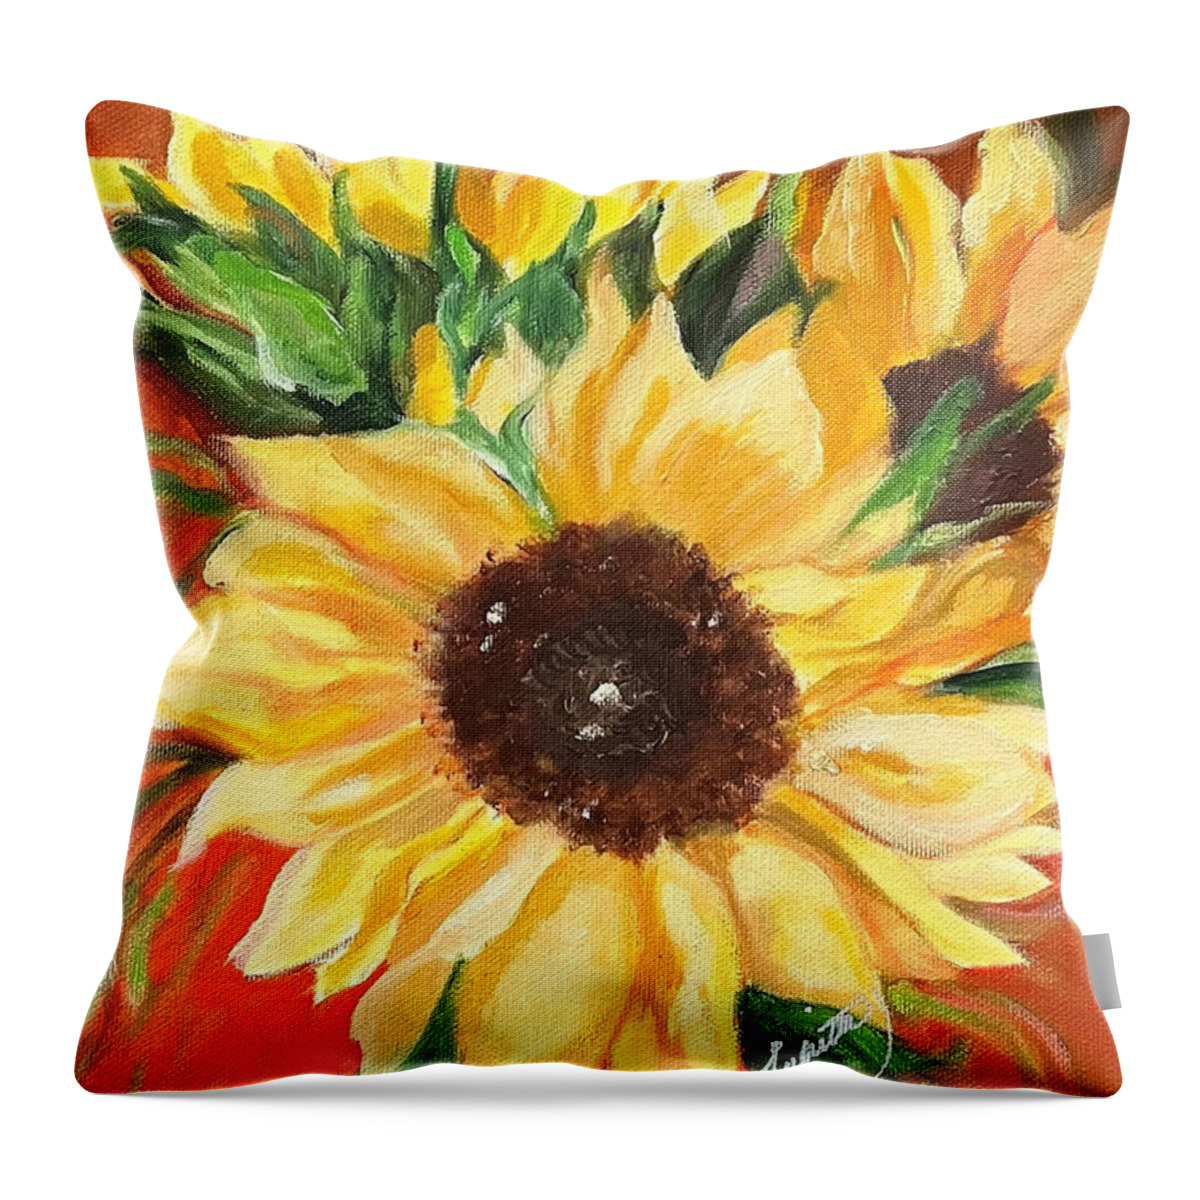 Sunny Throw Pillow featuring the painting Good Morning, Sunshine by Juliette Becker